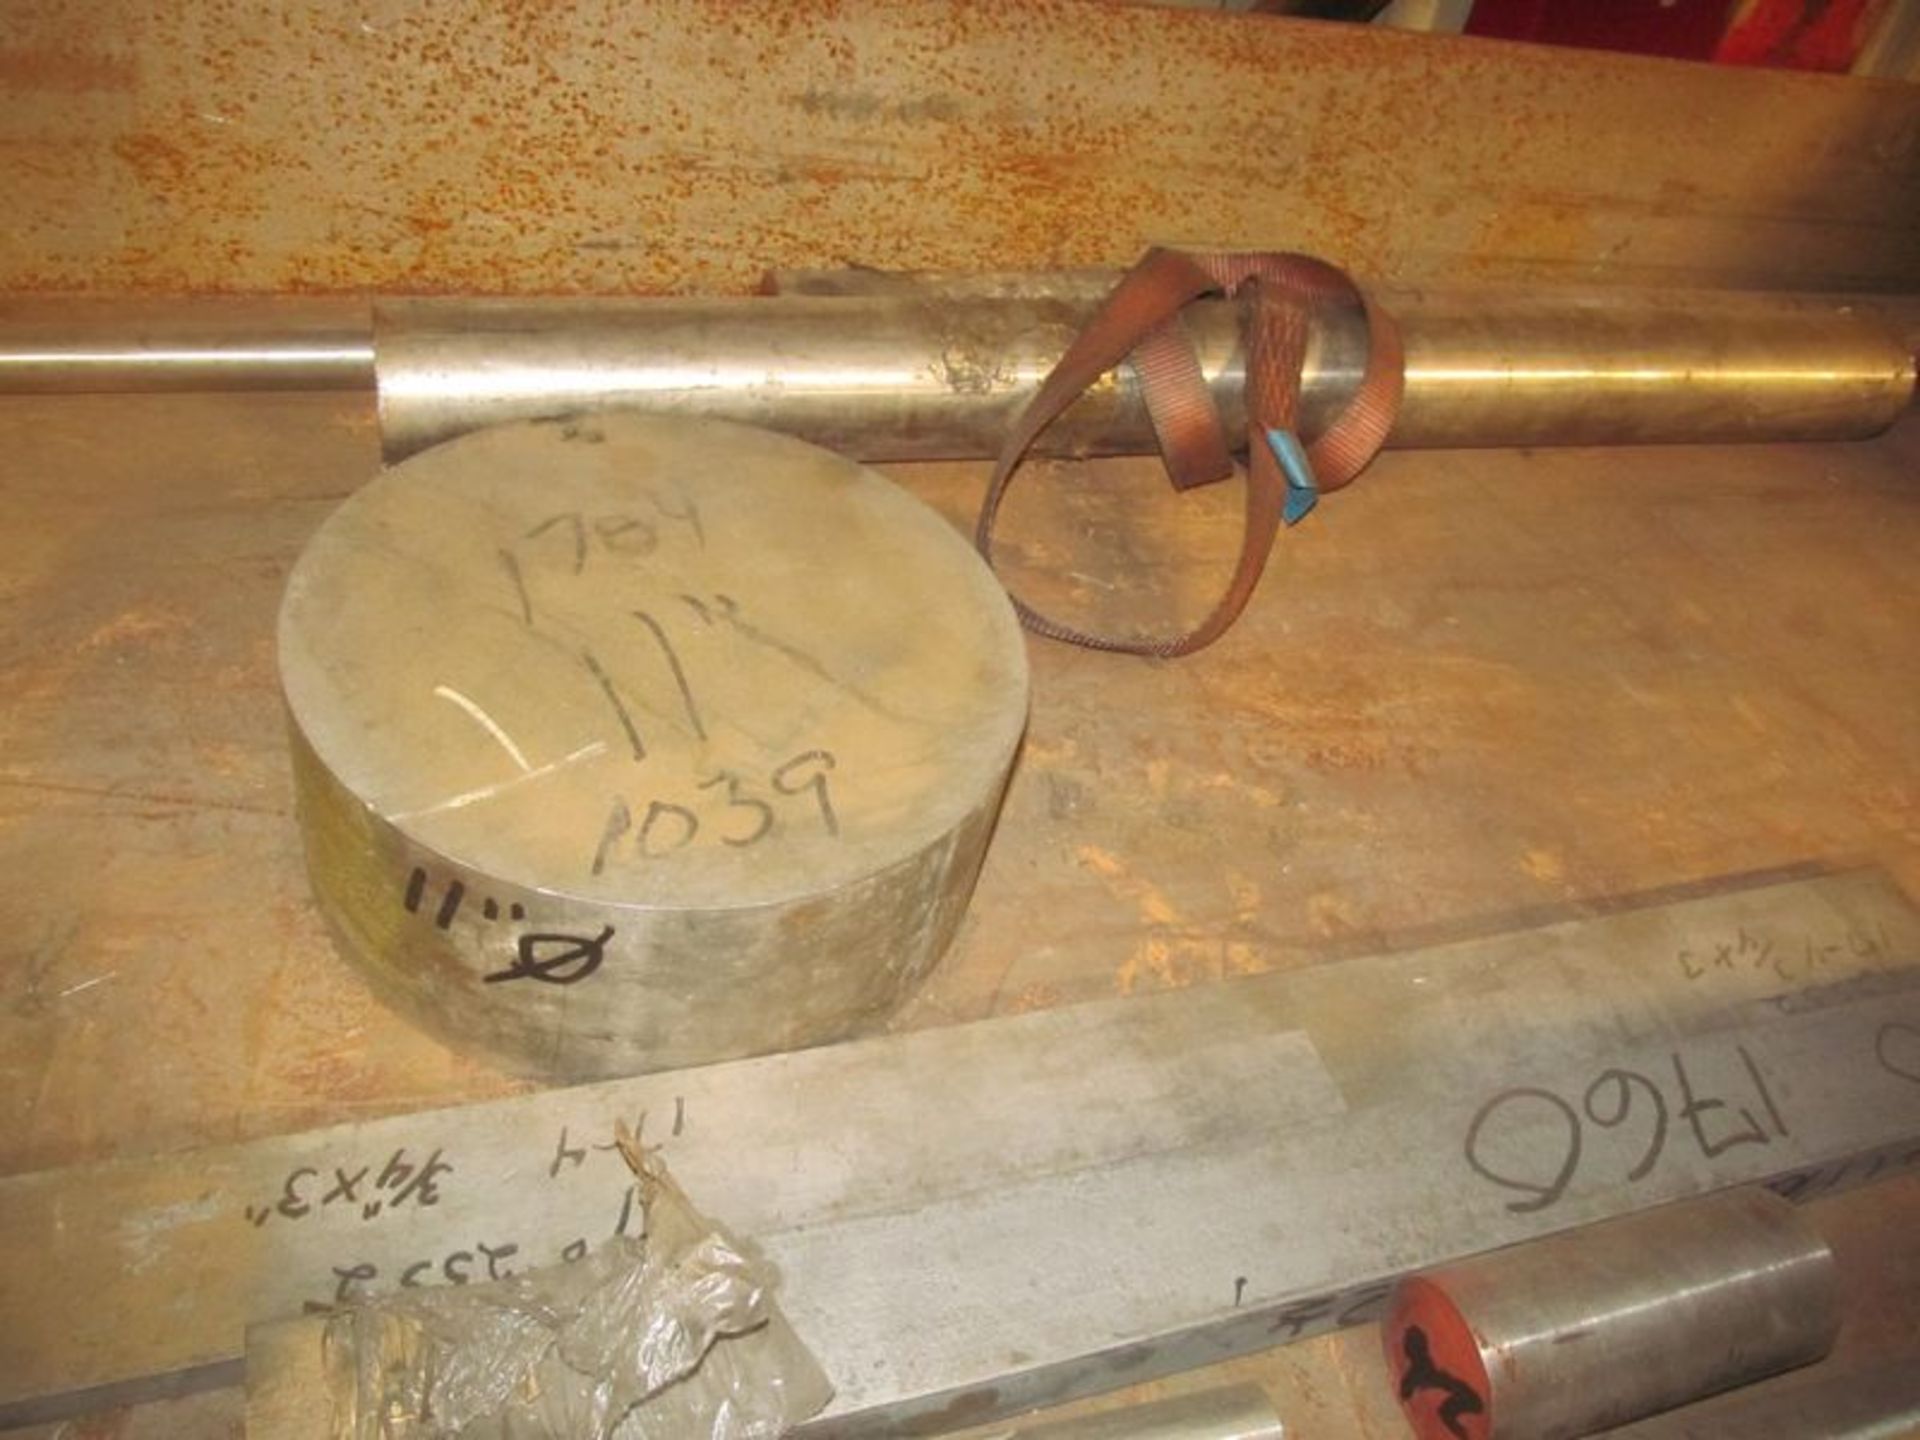 Lot of Stainless Steel grade 440C, 1"-2 3/4" diameter, round thickness, approx. 400 lbs. (rack 12) - Image 2 of 2